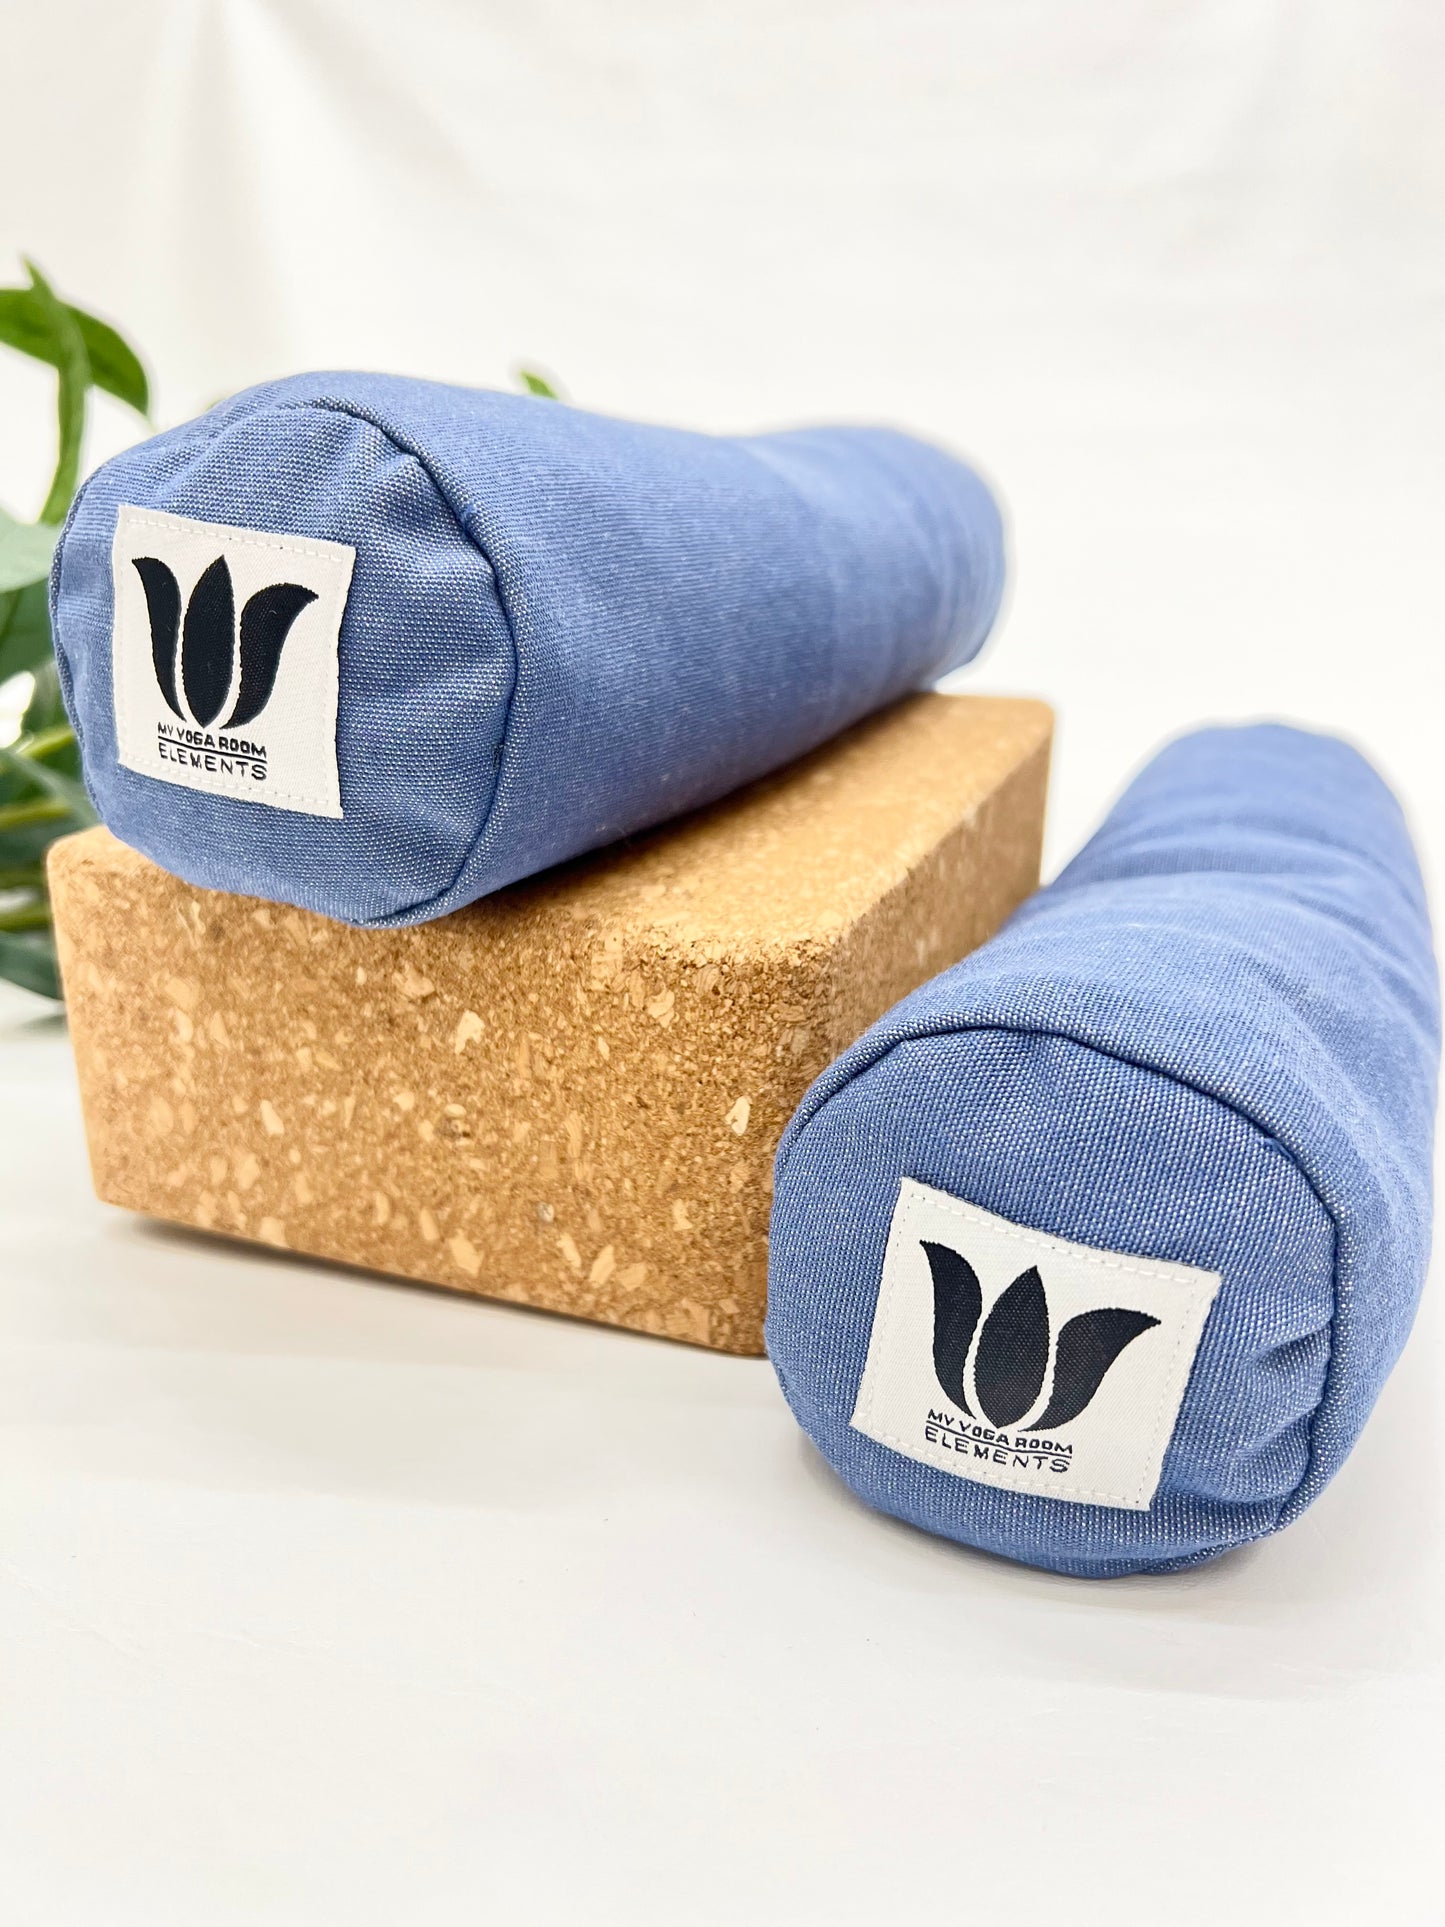 Mini yoga bolster in durable fabric, solid medium blue fabric. Cushion and support the body in the practice of yoga and meditation.Removeable cover. Made in Canada by My Yoga Room Elements